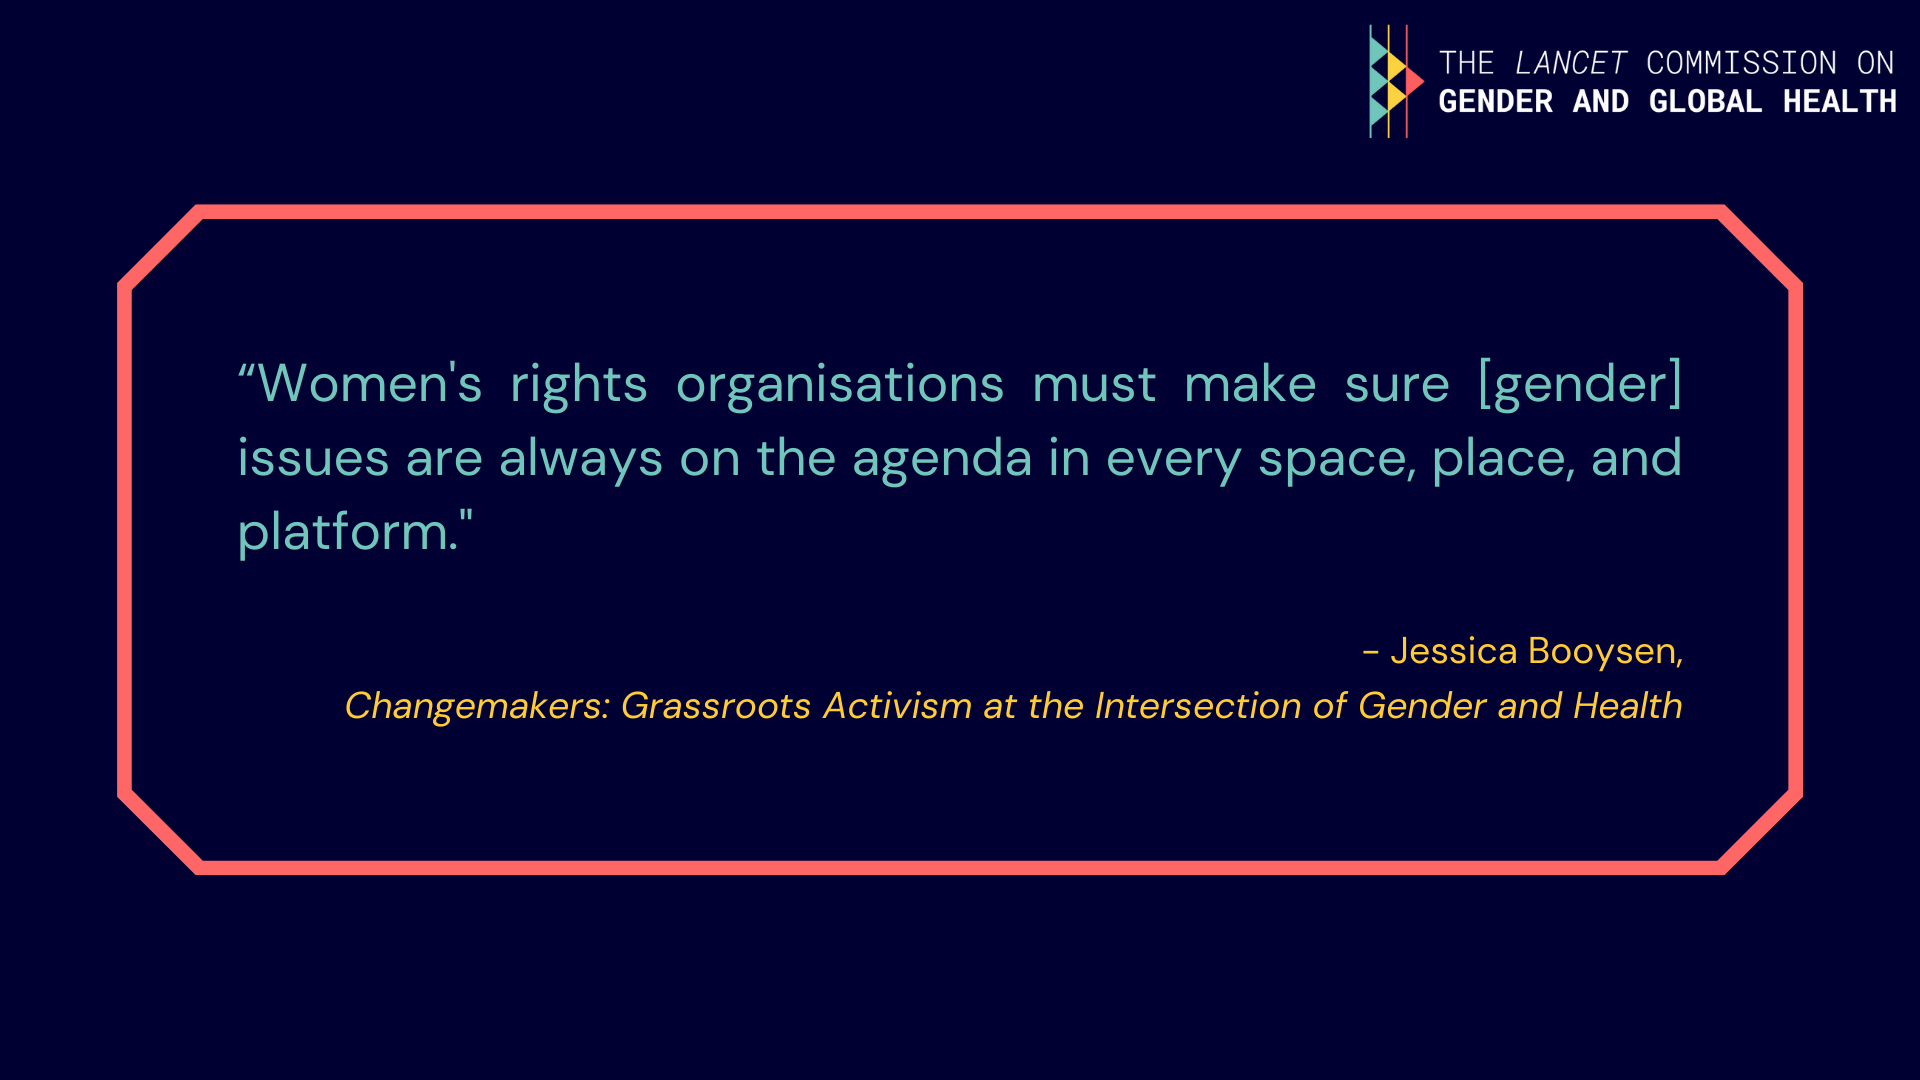 Quote from Jessica Booysen: "Women's rights organisations must make sure [gender] issues are always on the agenda in every space, place, and platform".